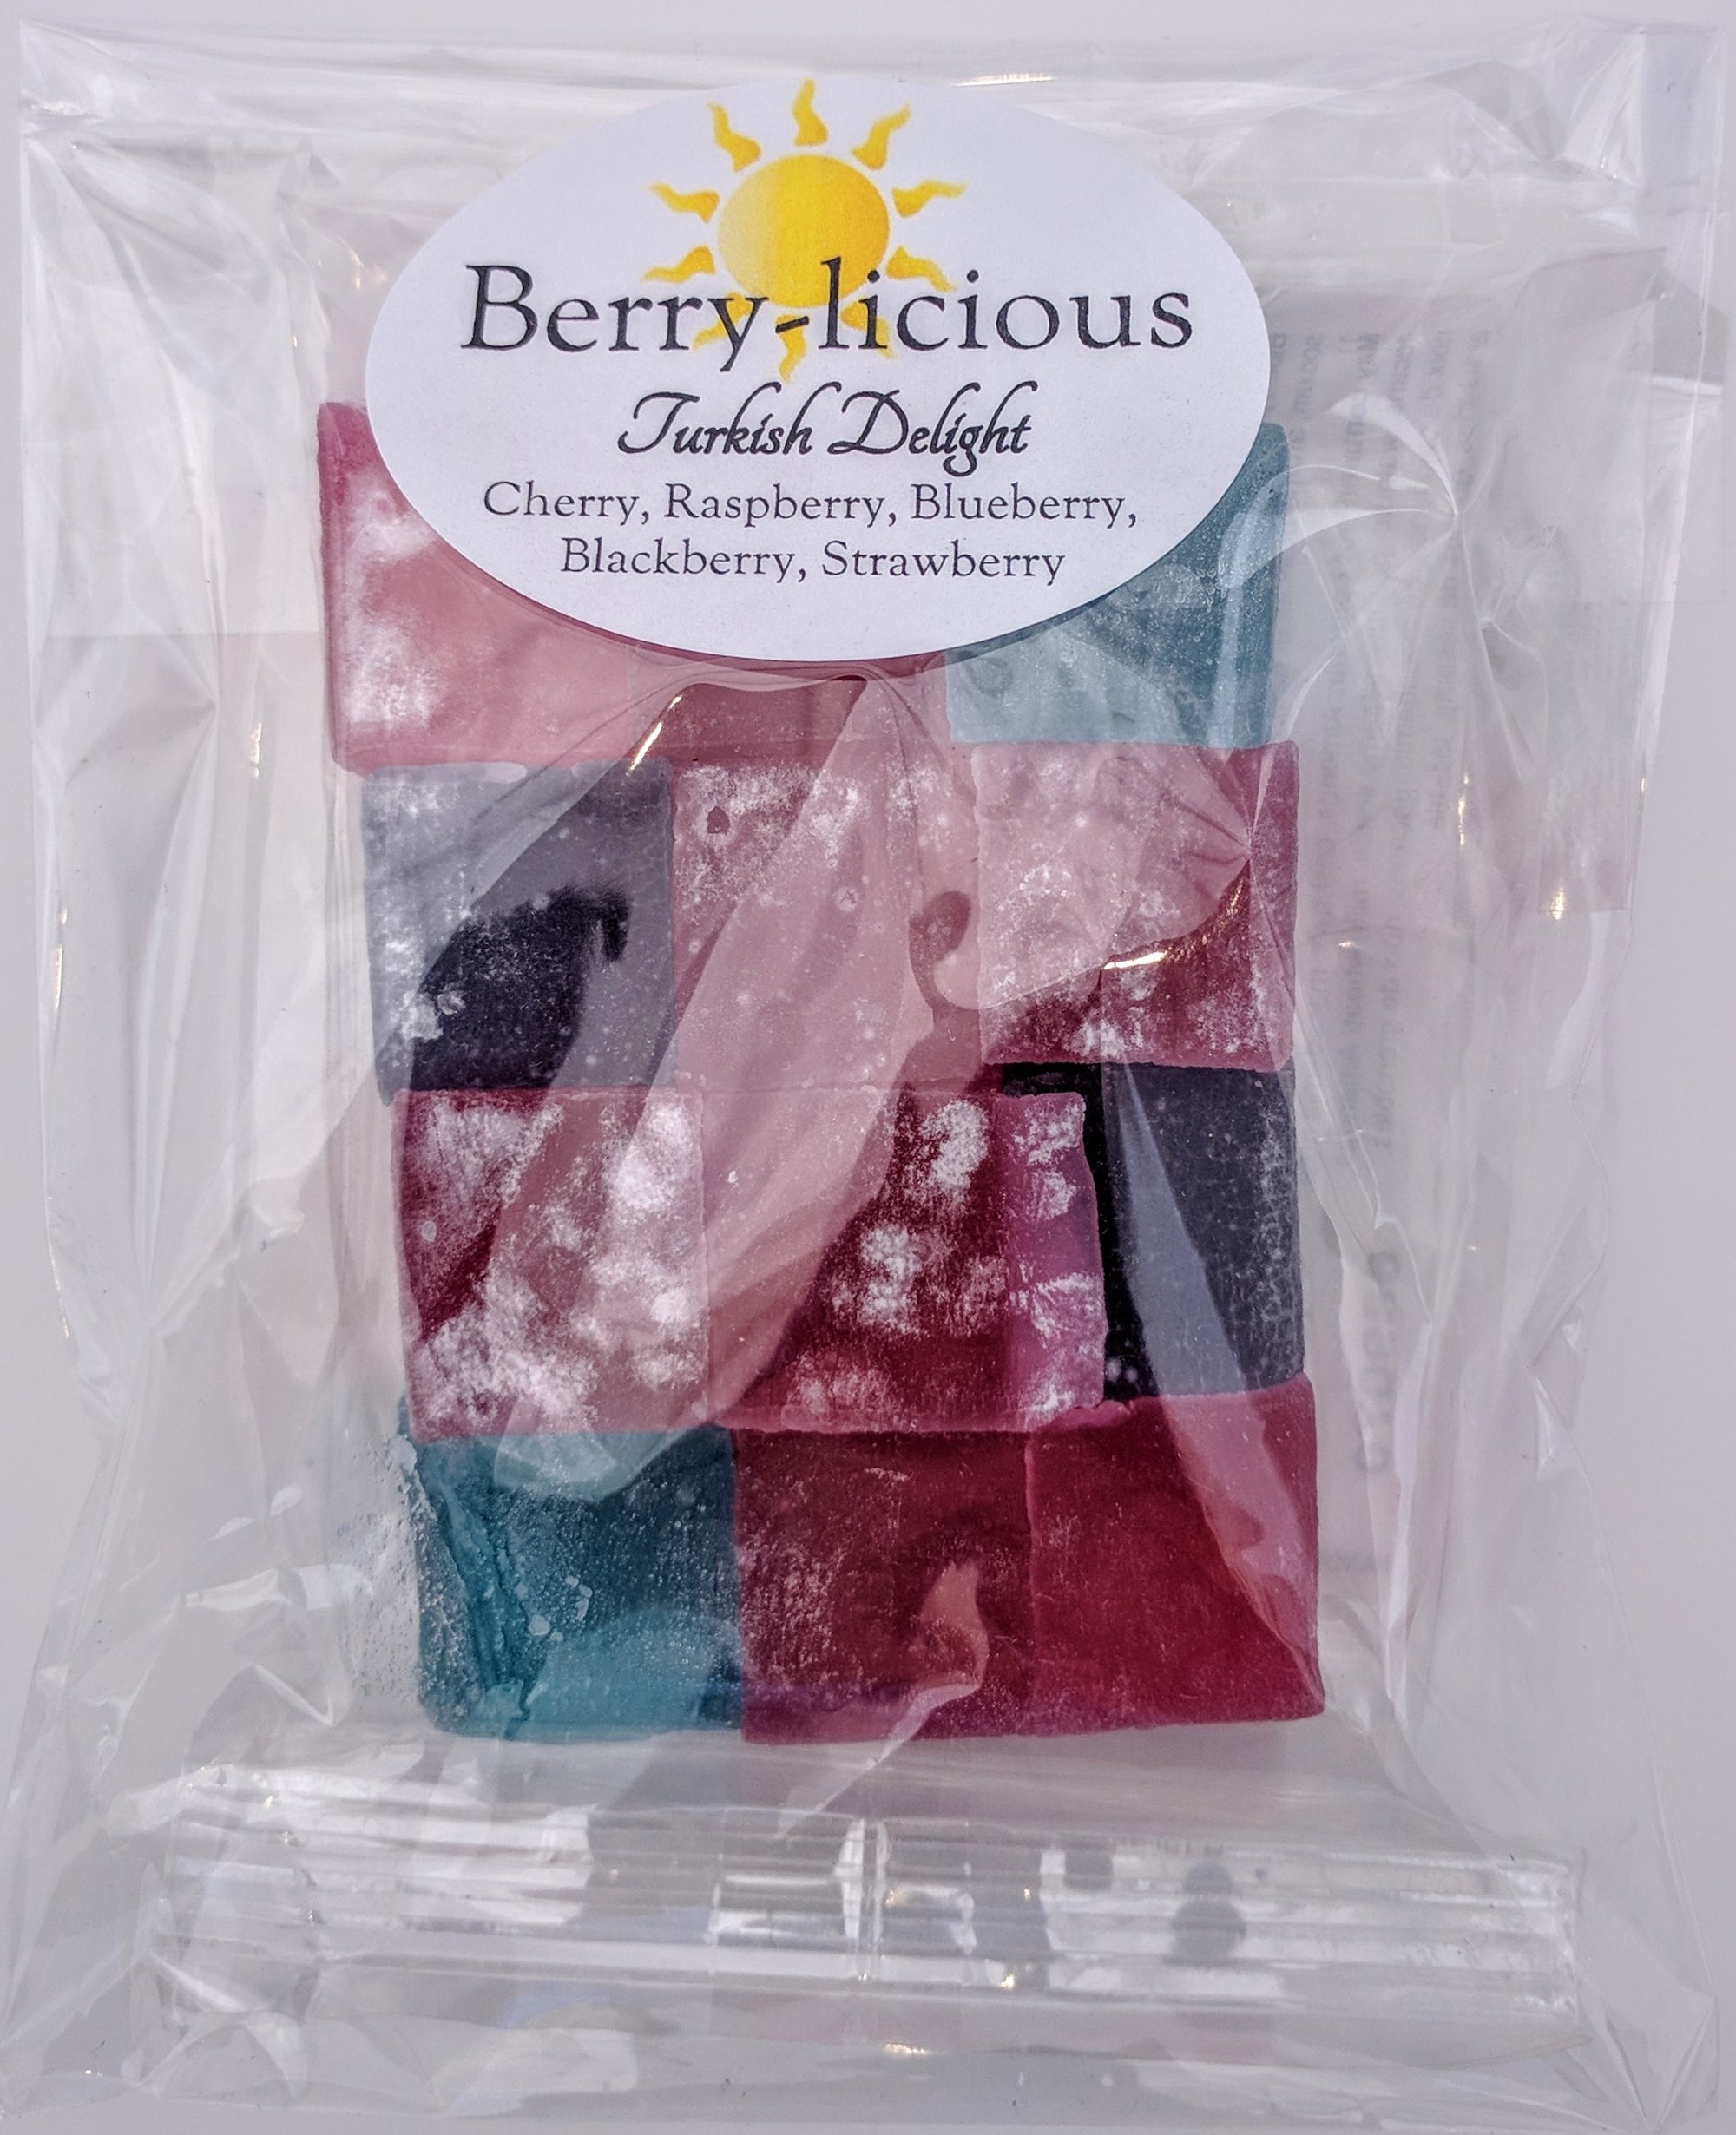 Berry-licious Turkish Delight, uncoated